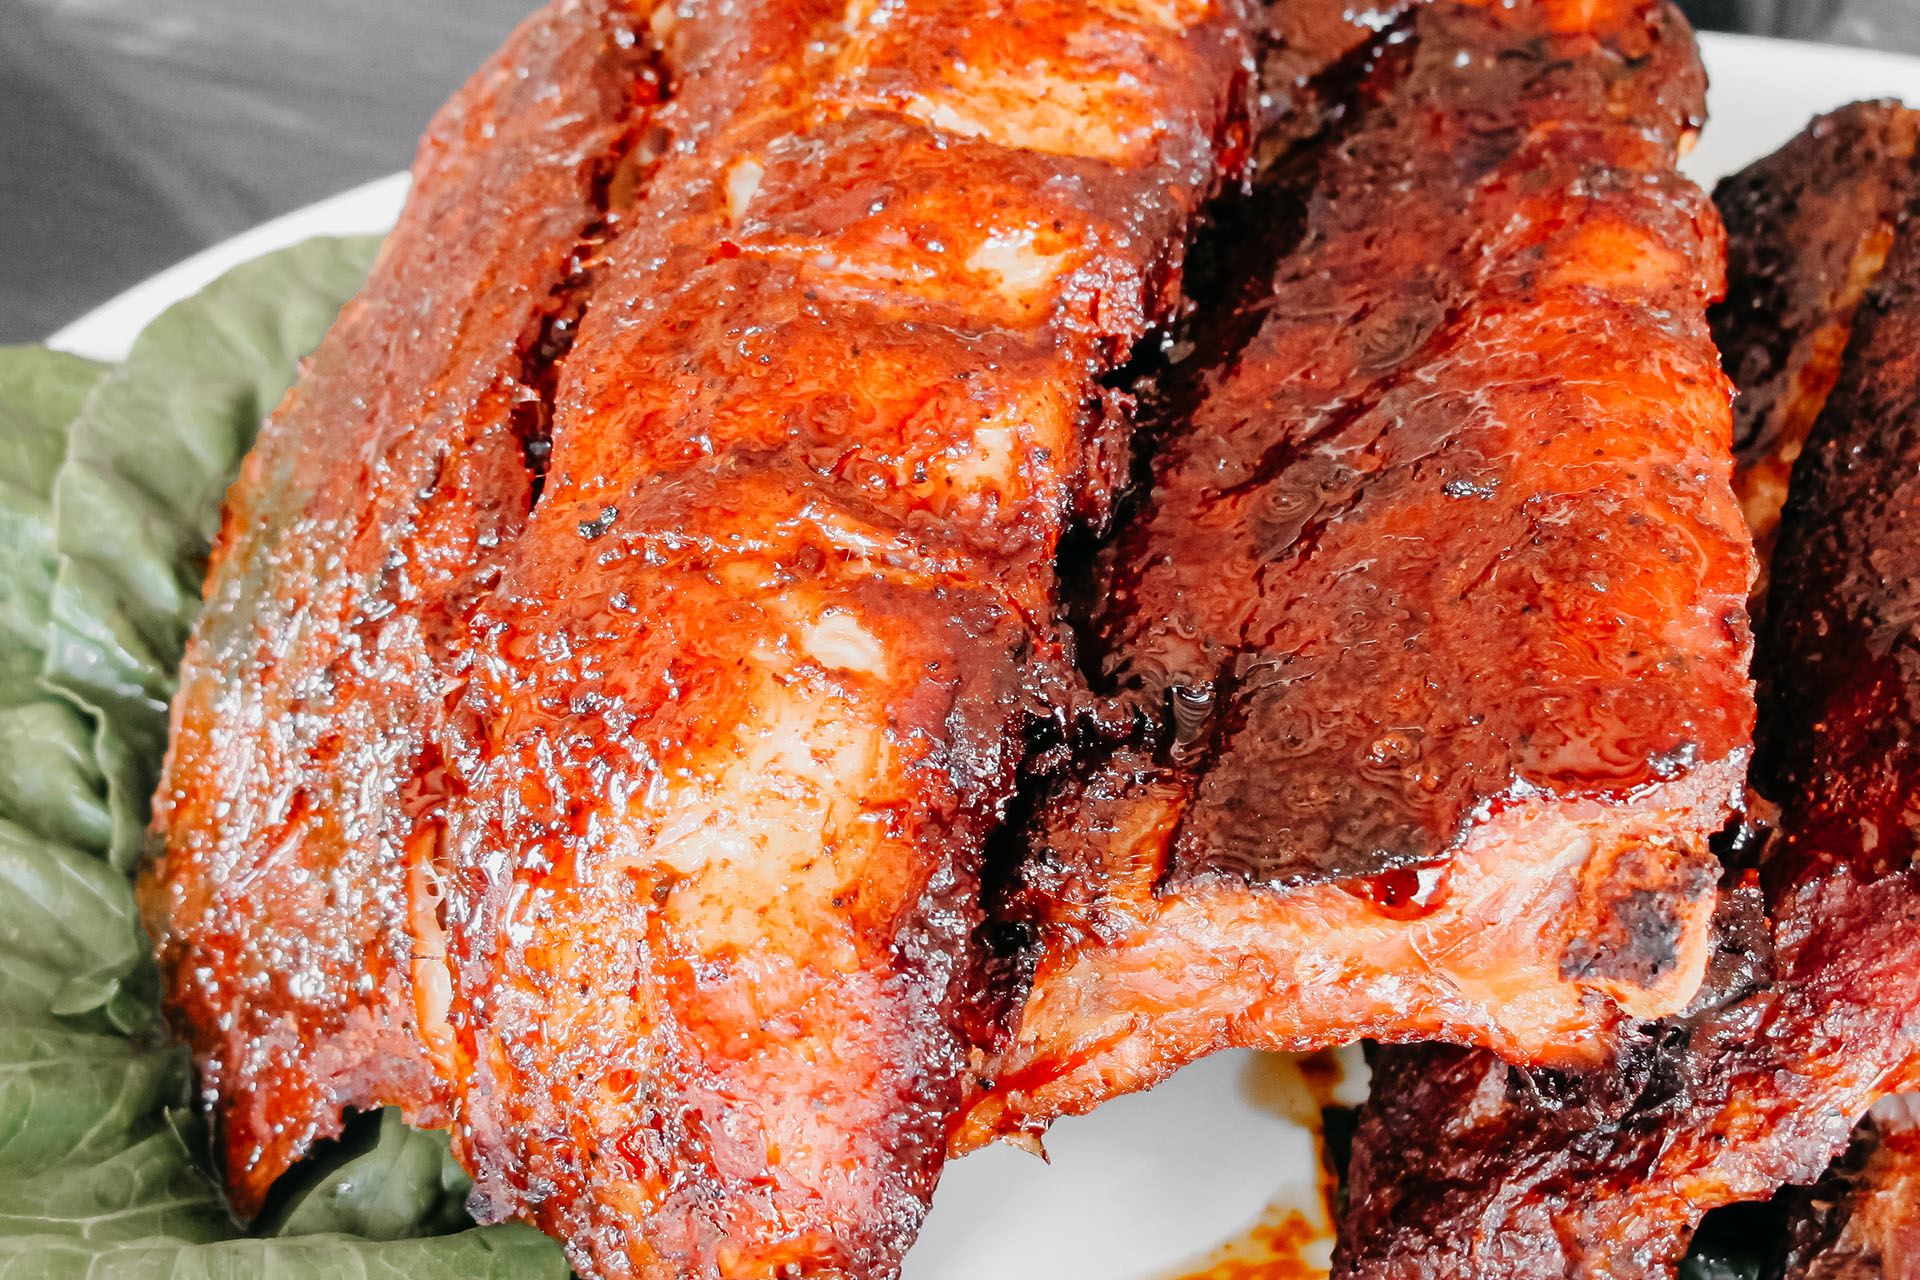 Bone Suckin' Dry Rub Ribs with Hot Honey Recipe: Ingredients Bone Suckin'® Seasoning & Rub, 3 oz Bone Suckin'® Hot Honey, 2 oz Racks of Baby Back Ribs, Spareribs, 3 Method Step 1 Coat both sides of the ribs evenly with Bone Suckin’® Seasoning & Rub. Cover and marinate 4 to 8 hours in the refrigerator. Step 2 Cook the ribs, in a covered dish, in the oven at 300˚ F for 3 hours. Uncover, sprinkle additional rub over the ribs and continue cooking food for an additional hour. Step 3 After removing ribs from oven, drizzle with Bone Suckin'® Hot Honey and allow to rest for 5 minutes. Enjoy!